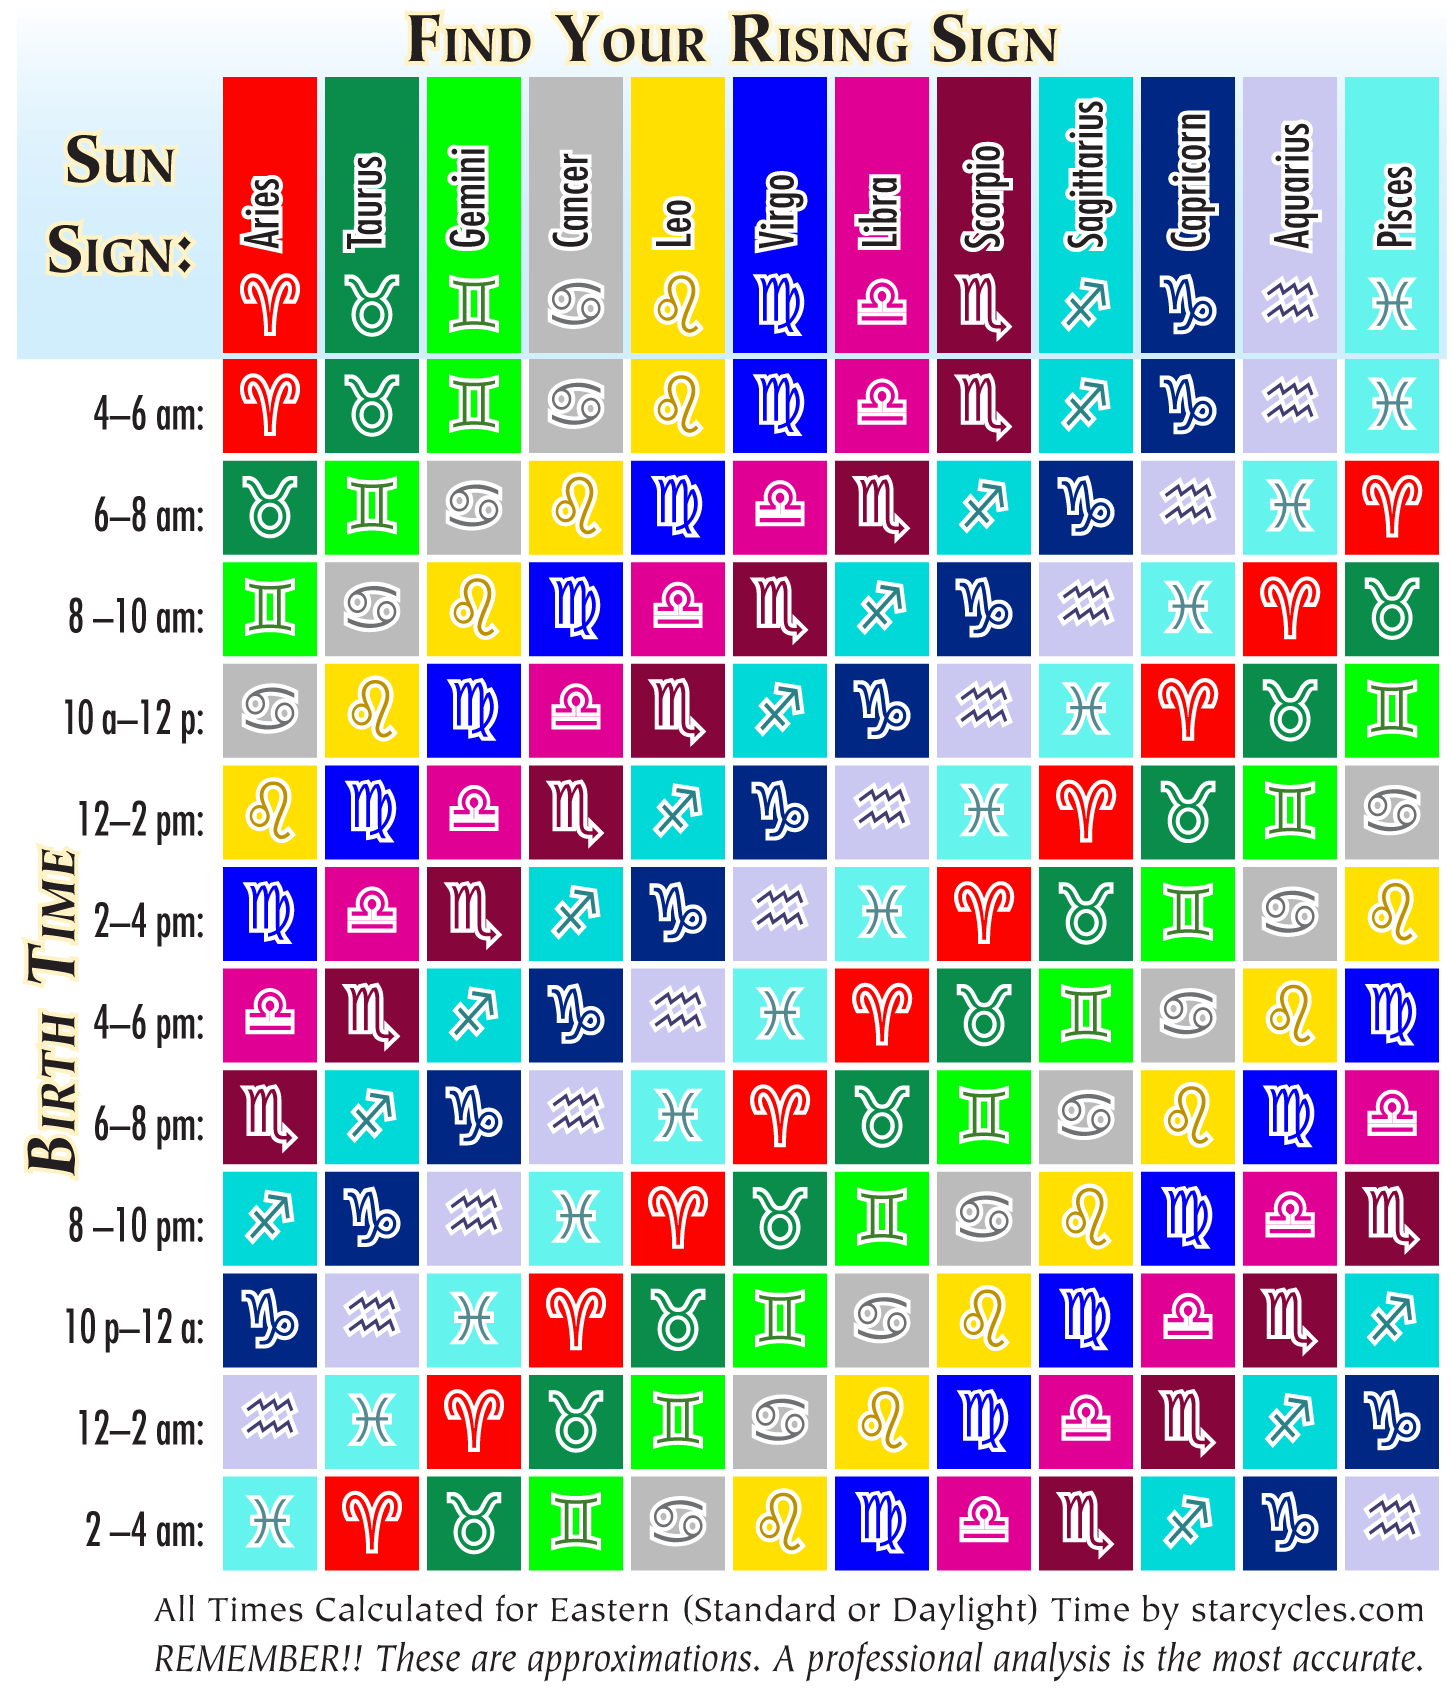 Channelling Transcendence - Rising Sign Chart! Most know their #sunsign If  you know your birth time, your rising sign is just a calculation away. ;)  #xoxo ❤🐝 #astrogirl #astrology #yegastrology #yeg  @channellingtranscendence #